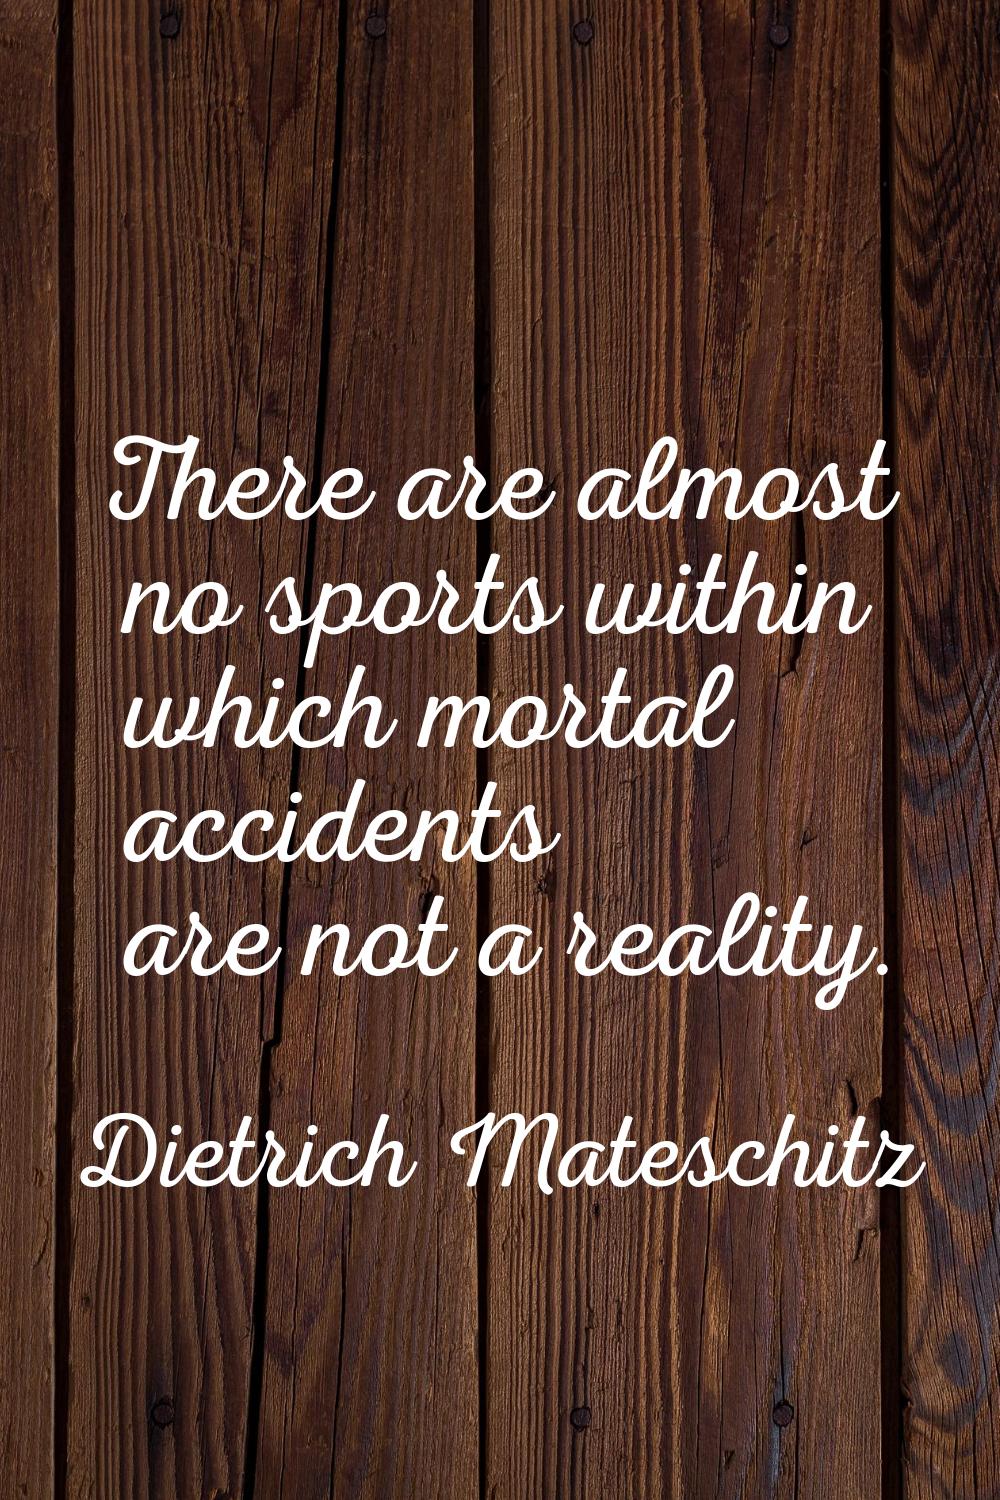 There are almost no sports within which mortal accidents are not a reality.